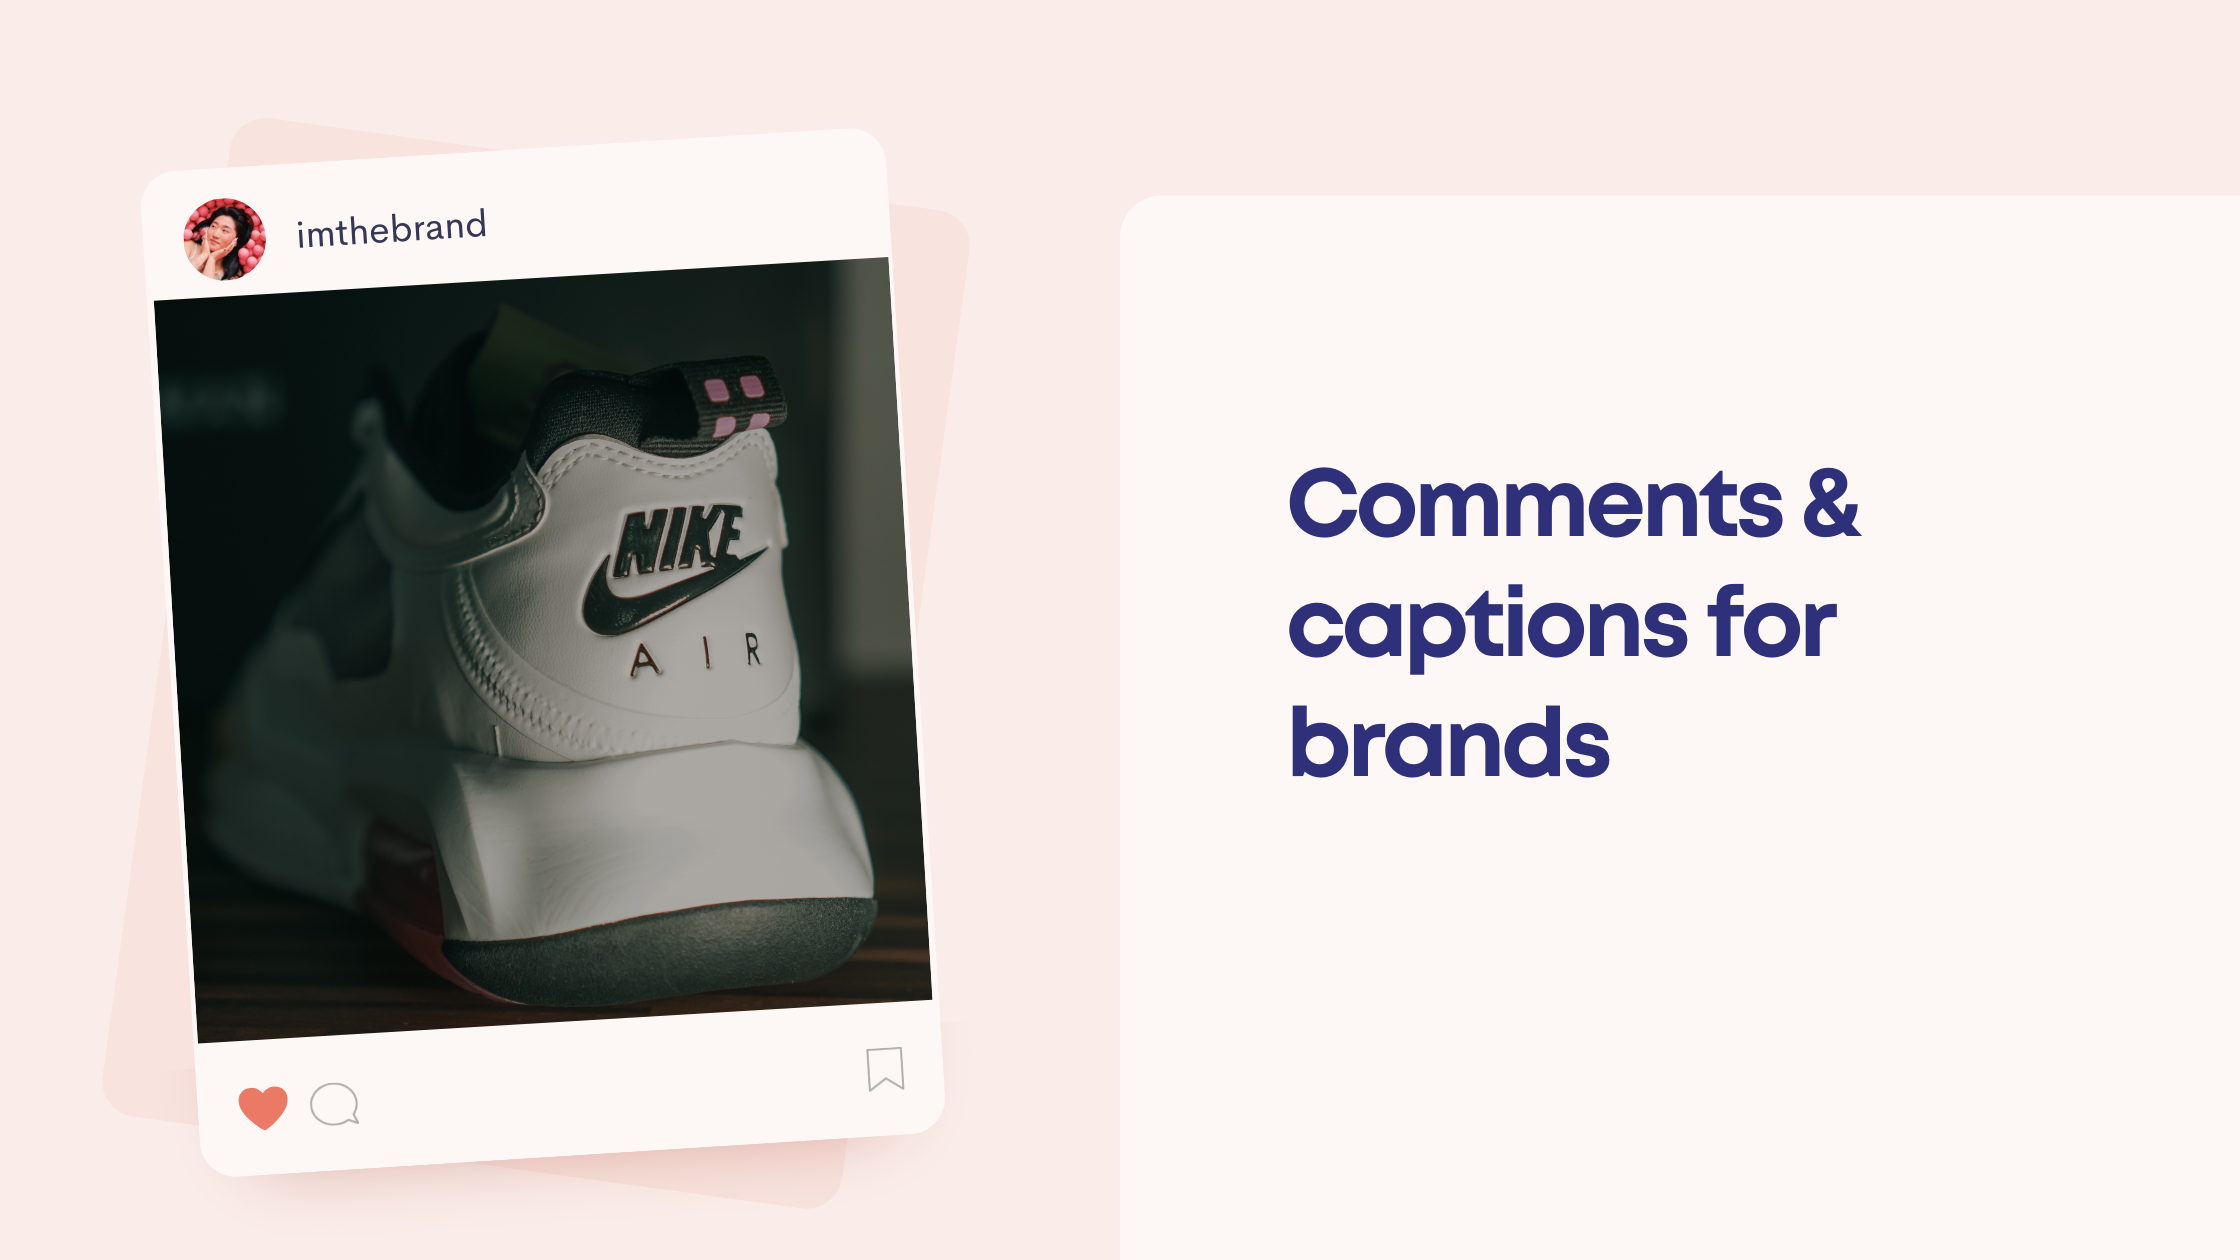 Remote.tools shares the list comments & captions for brands on Instagram